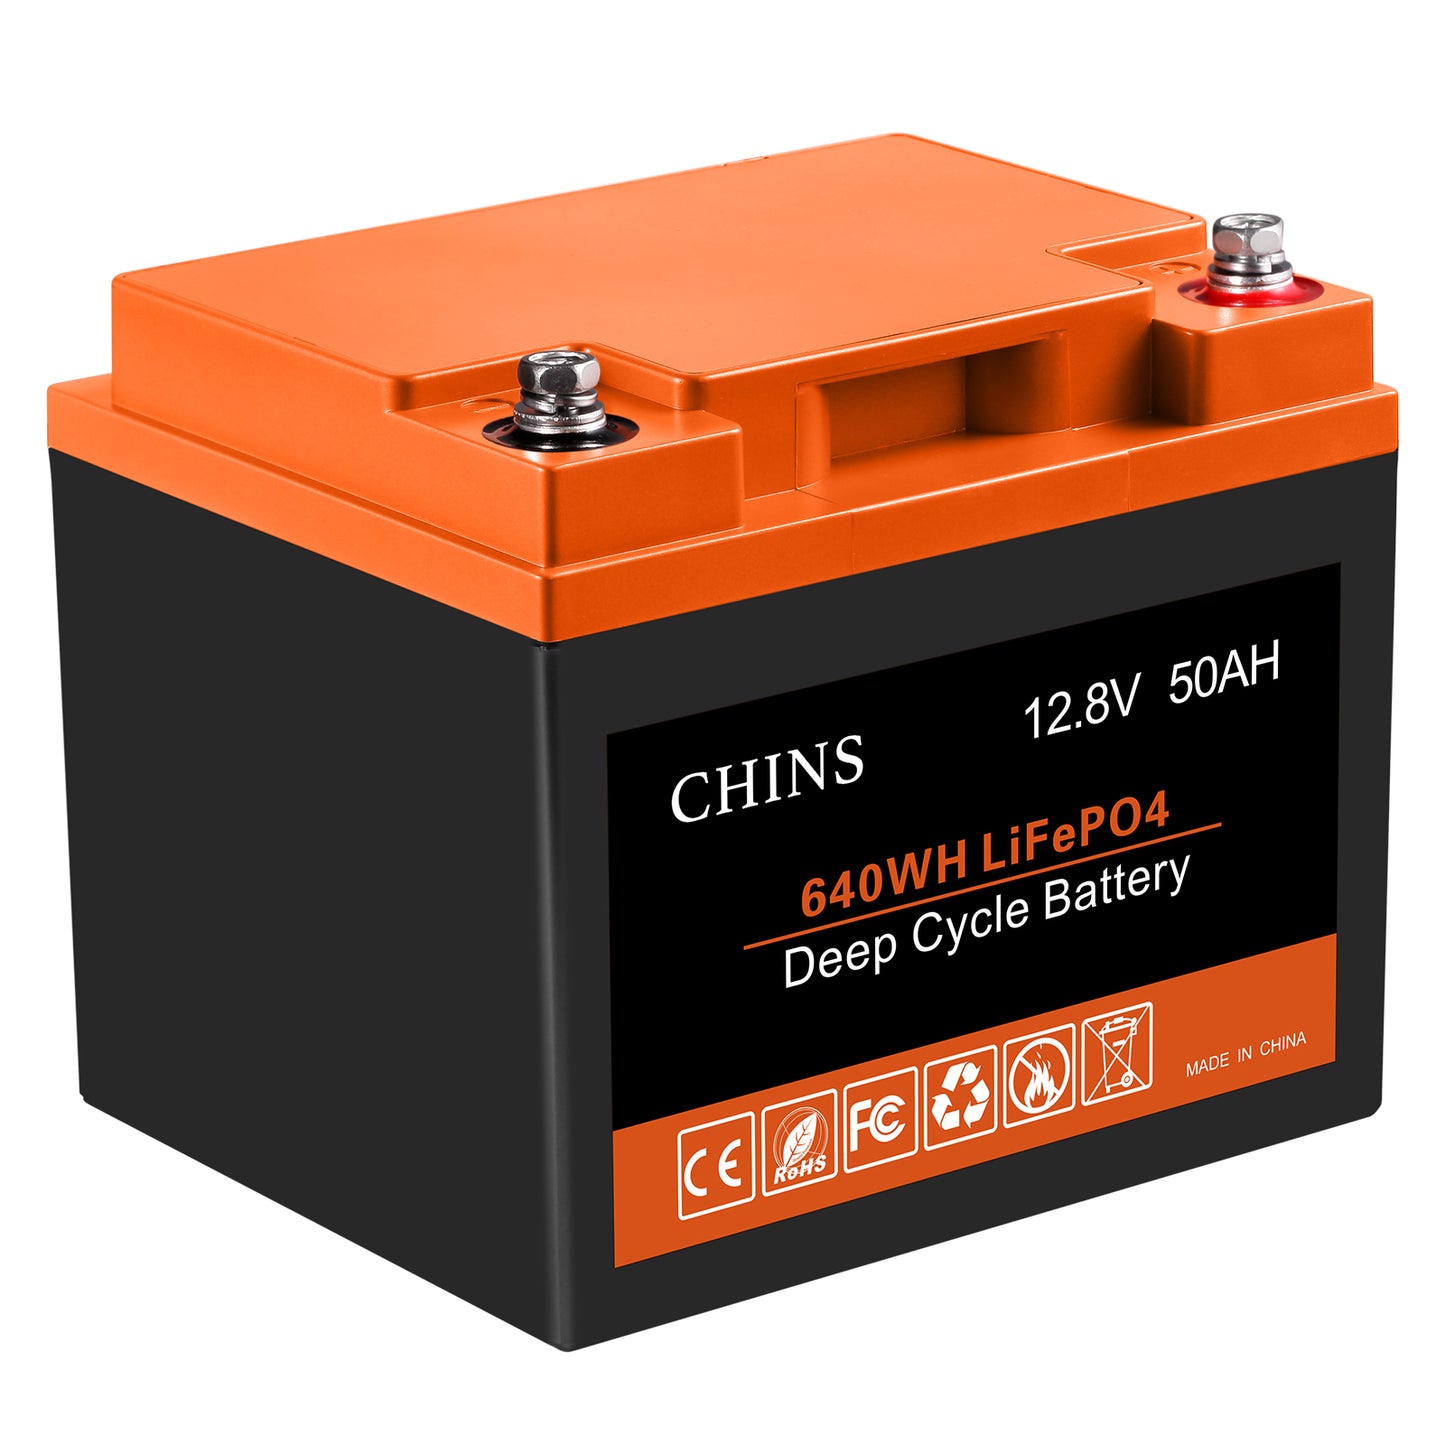 CHINS 12V 200Ah PLUS LiFePO4 Lithium Battery - Built-in 200A BMS, Perfect  for Replacing Most of Backup Power, Home Energy Storage and Off-Grid etc.